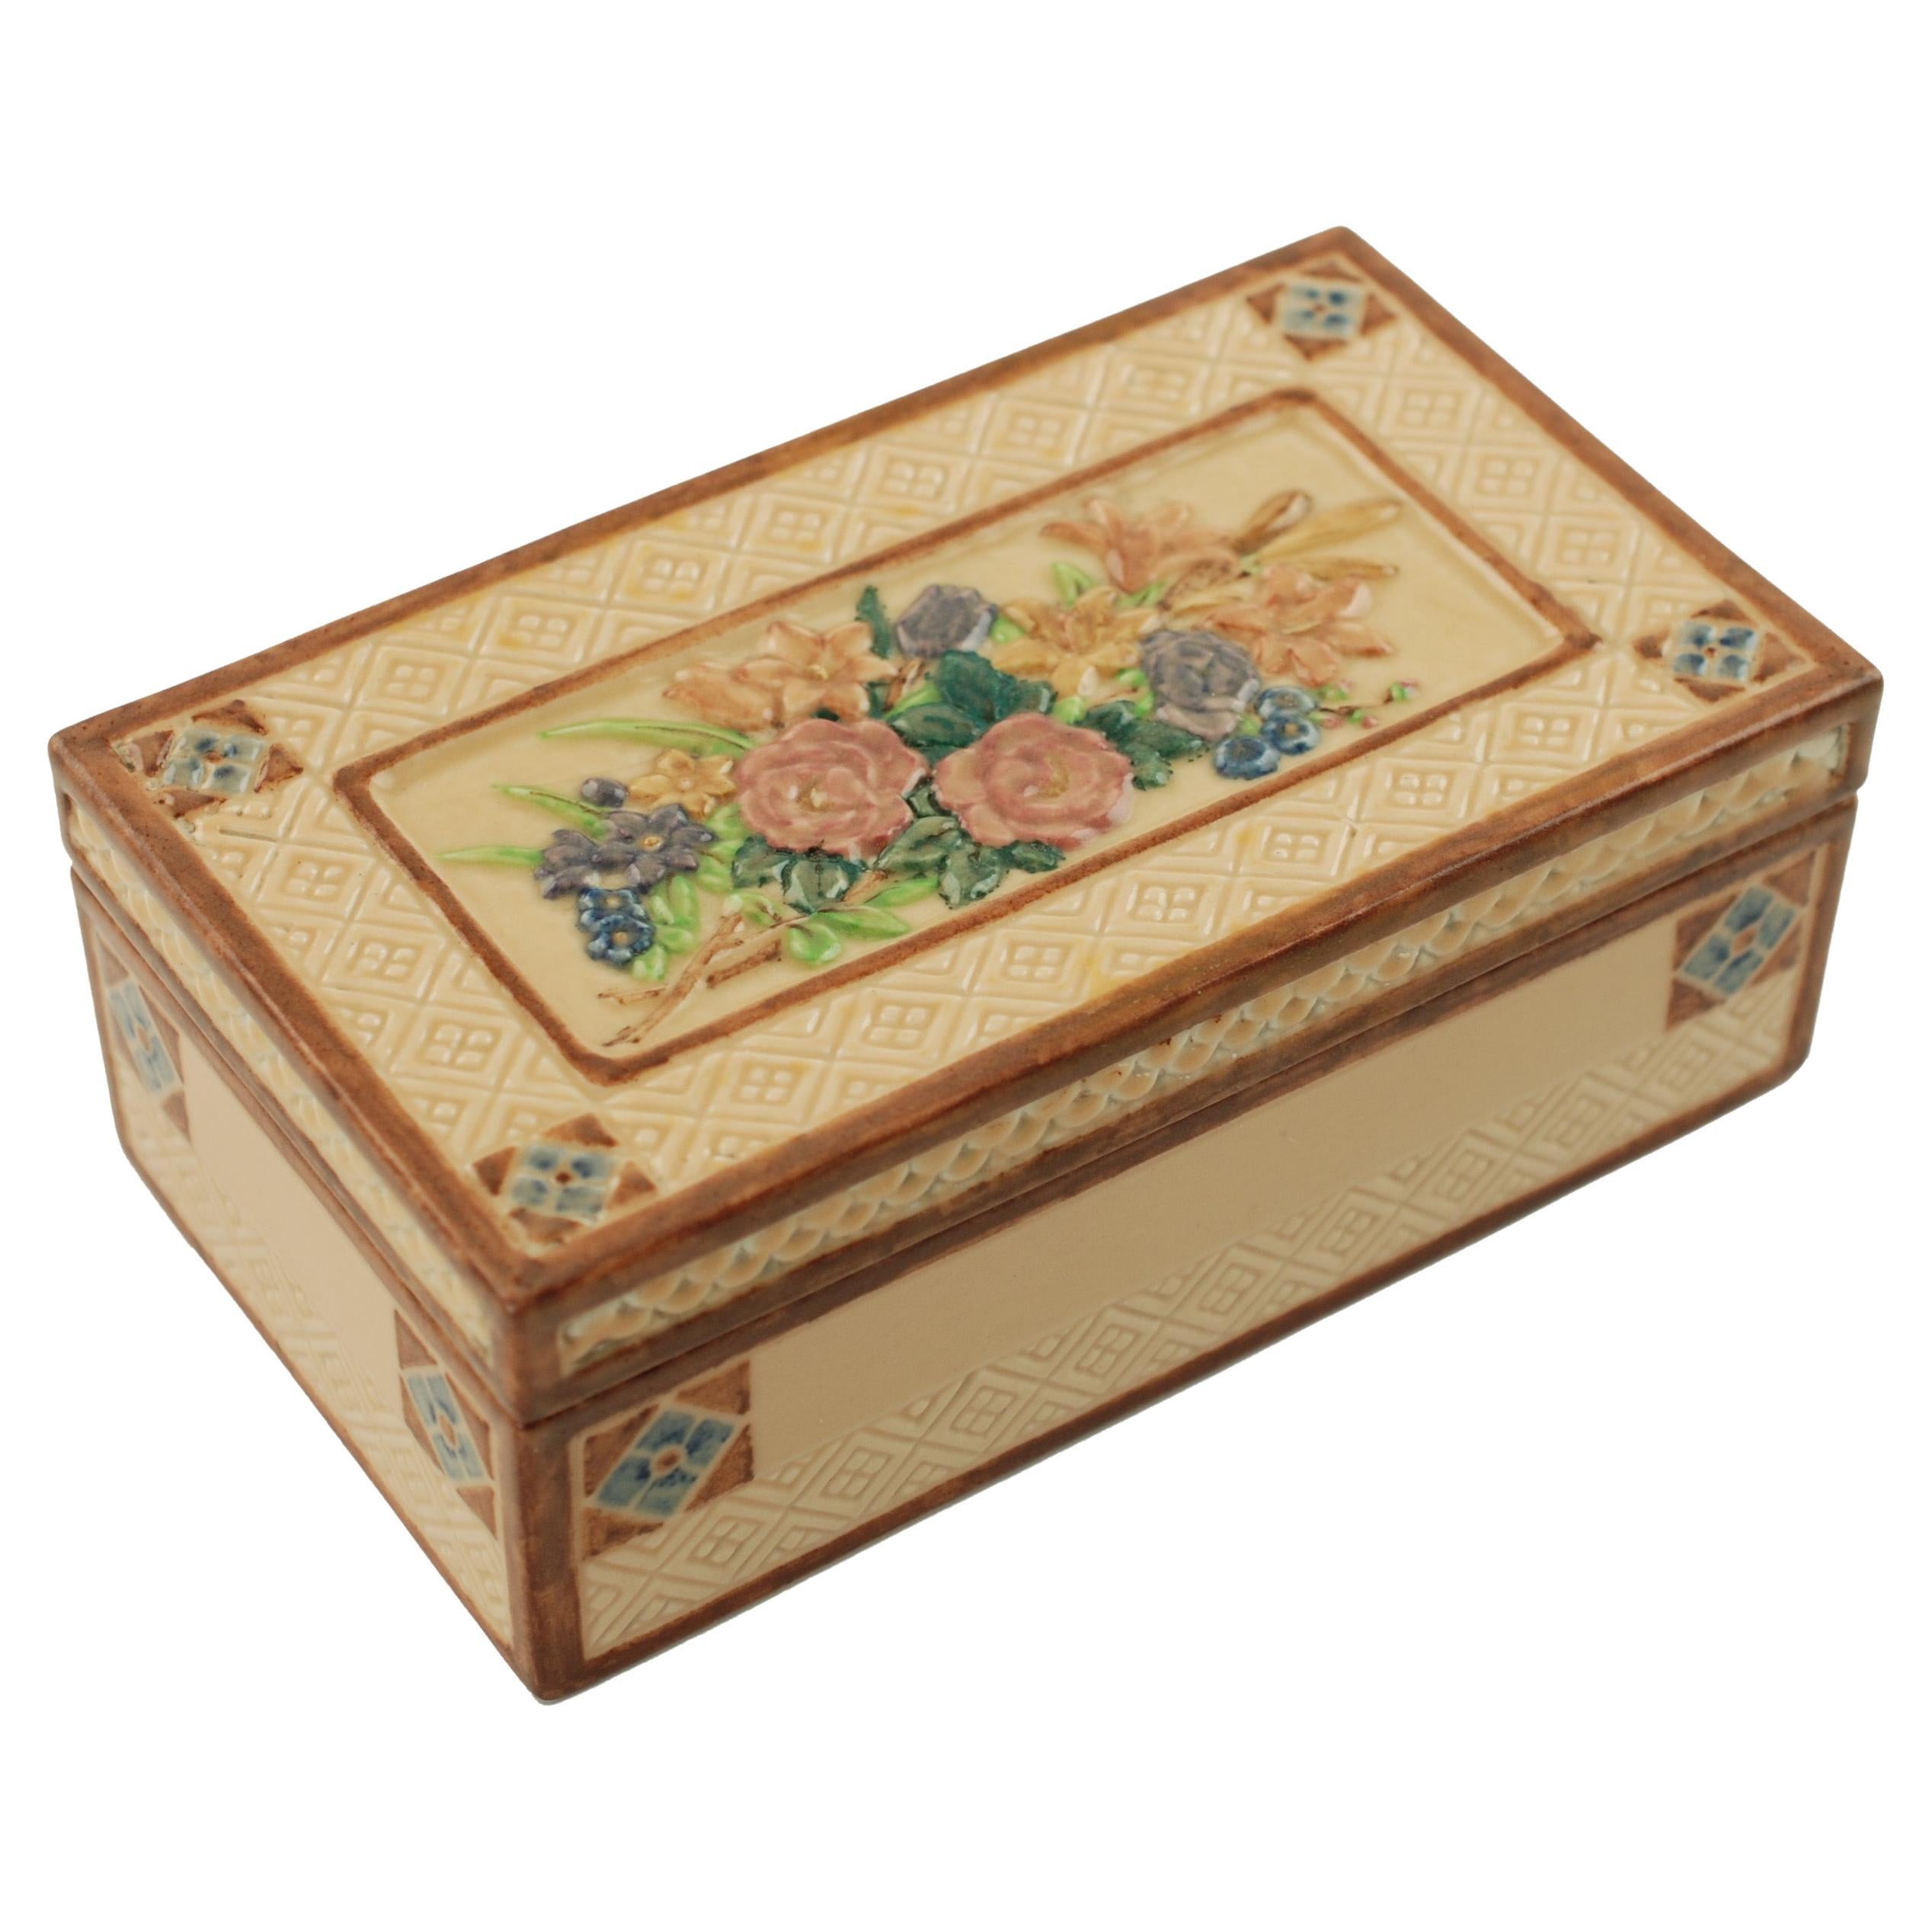 Rookwood Pottery Co. Boxes